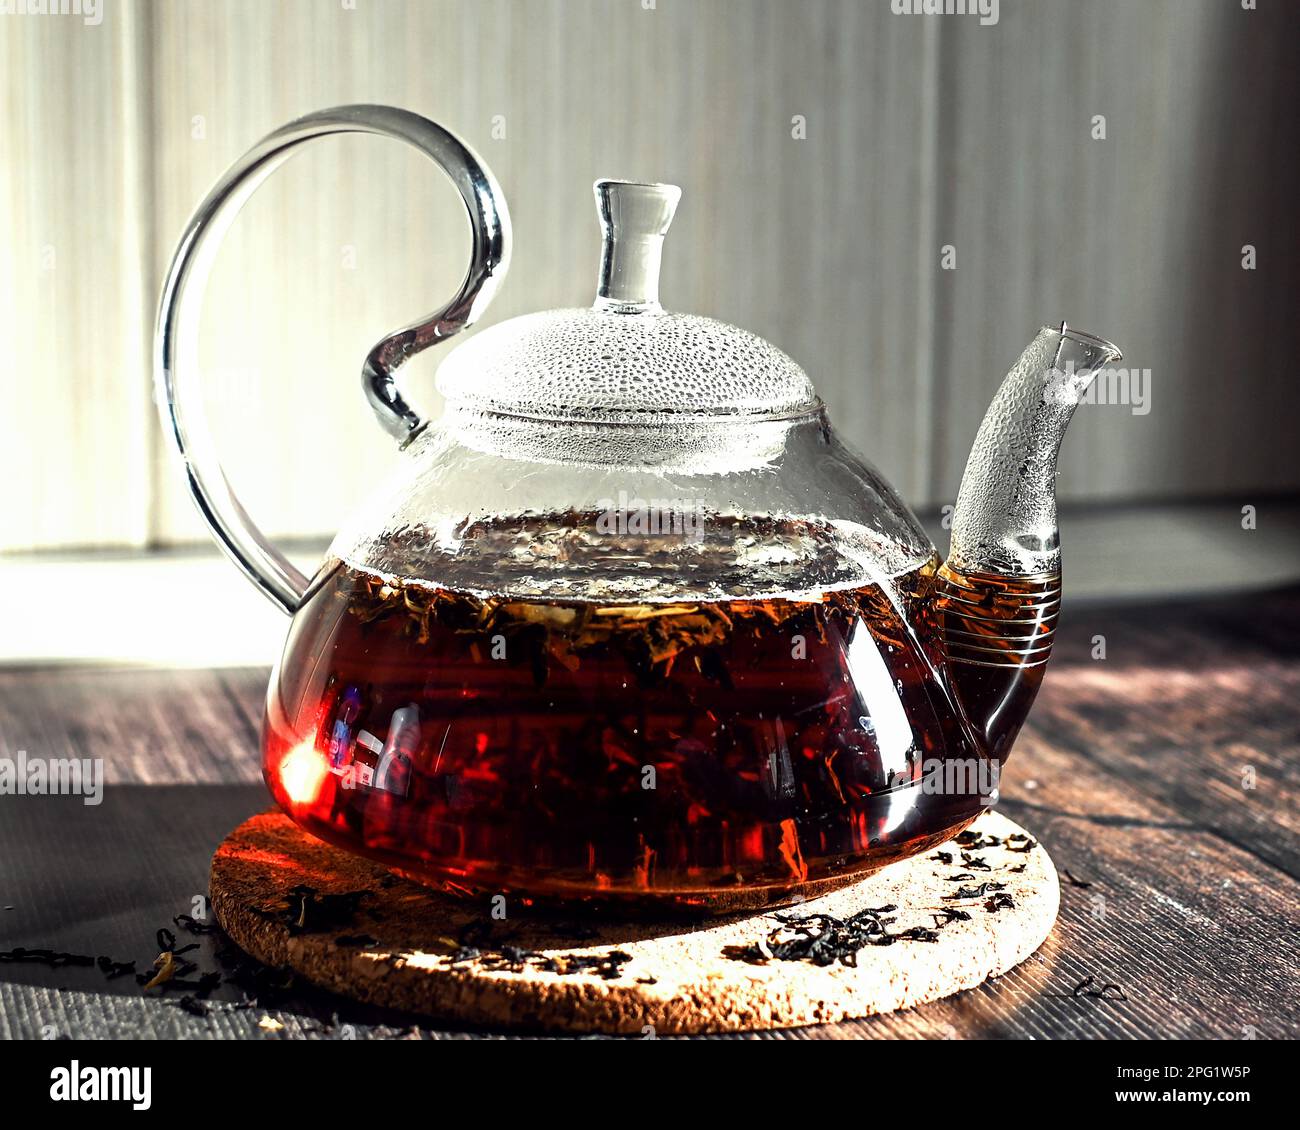 Hand Pouring Jug Of Tea Isolated On A White Background Stock Photo, Picture  and Royalty Free Image. Image 102431803.